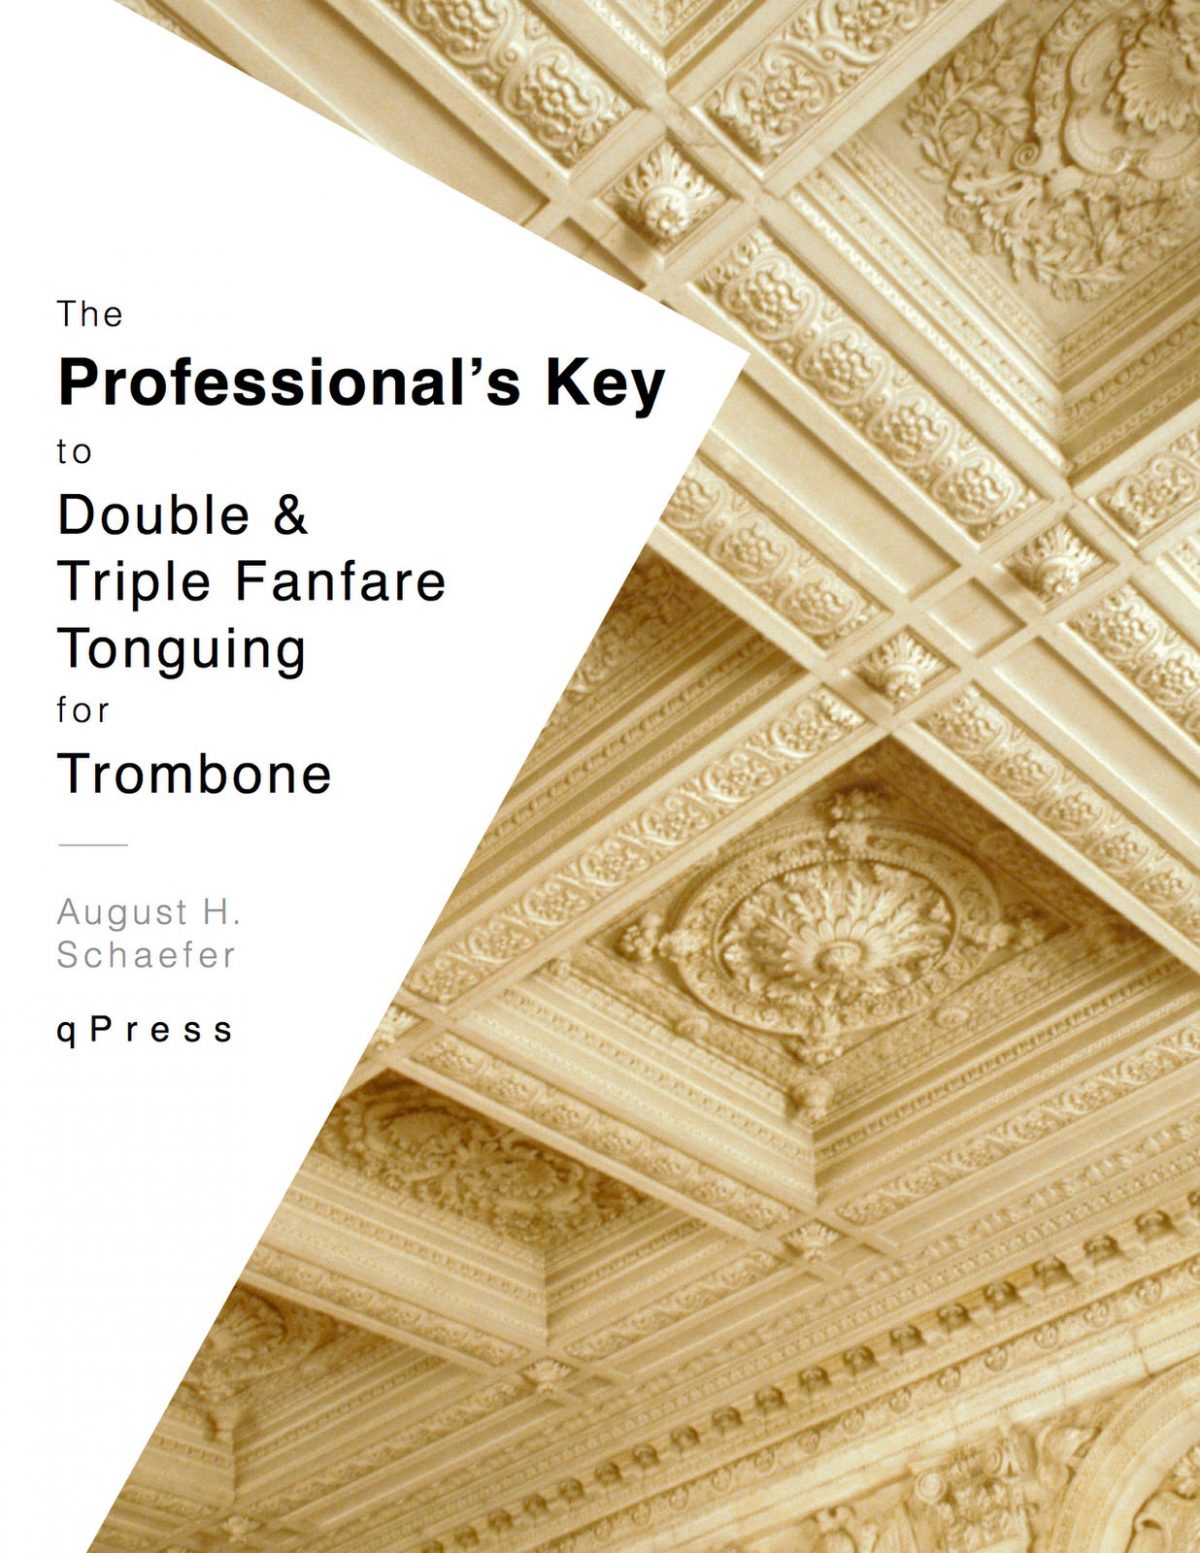 schaeffer, the professional's key to doubke and triple fanfare tonguing for trombone cover-p1